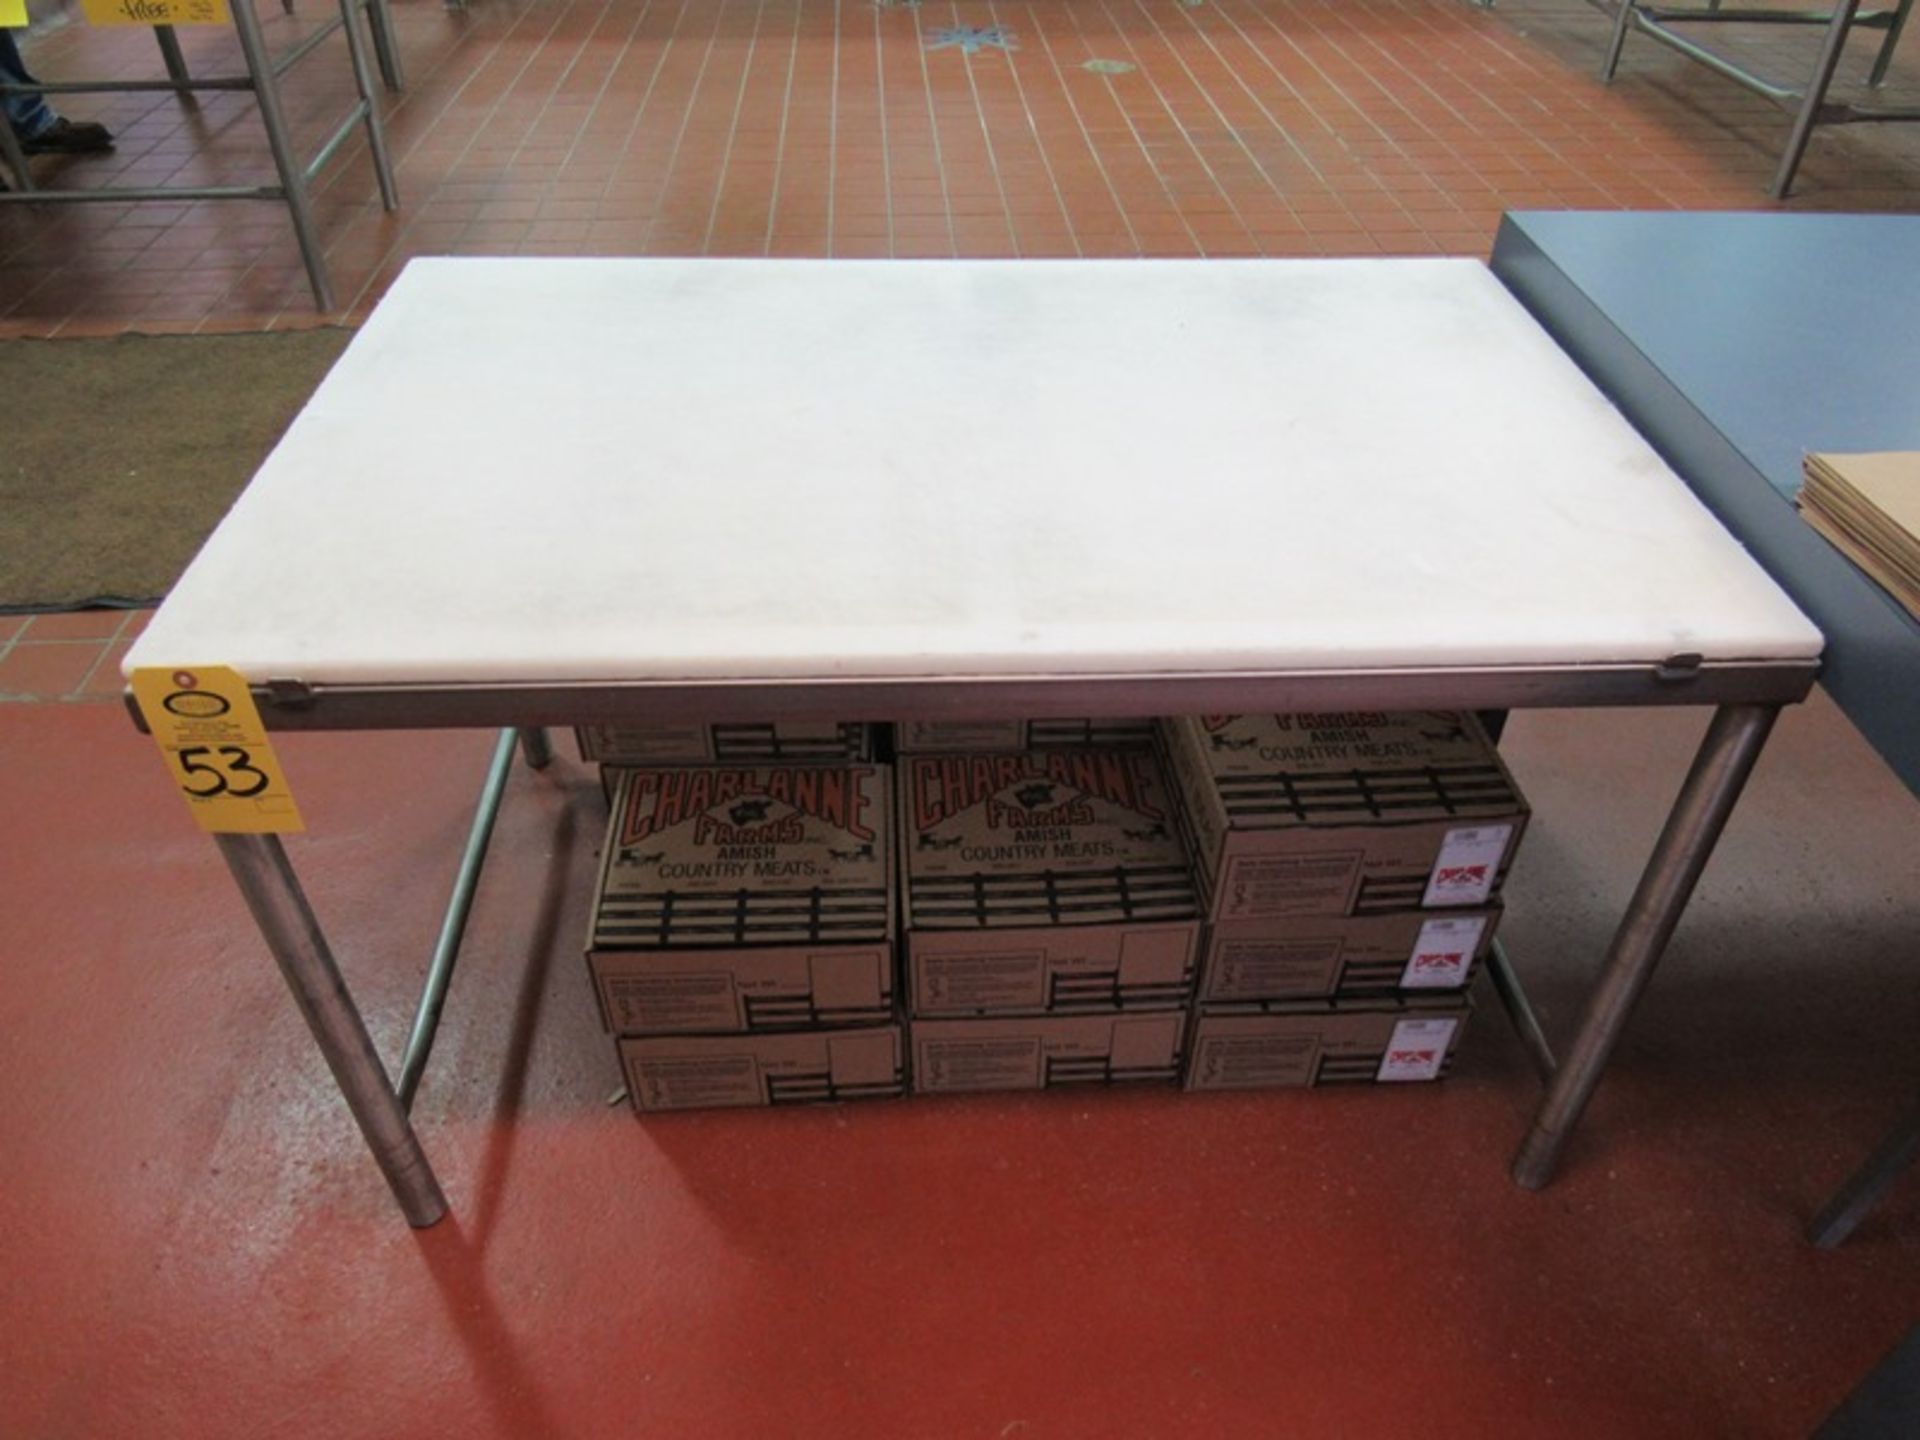 Stainless Steel Table, 30" W X 4'L poly top(Required Loading Fee $10.00 - Small Items Will Be Loaded